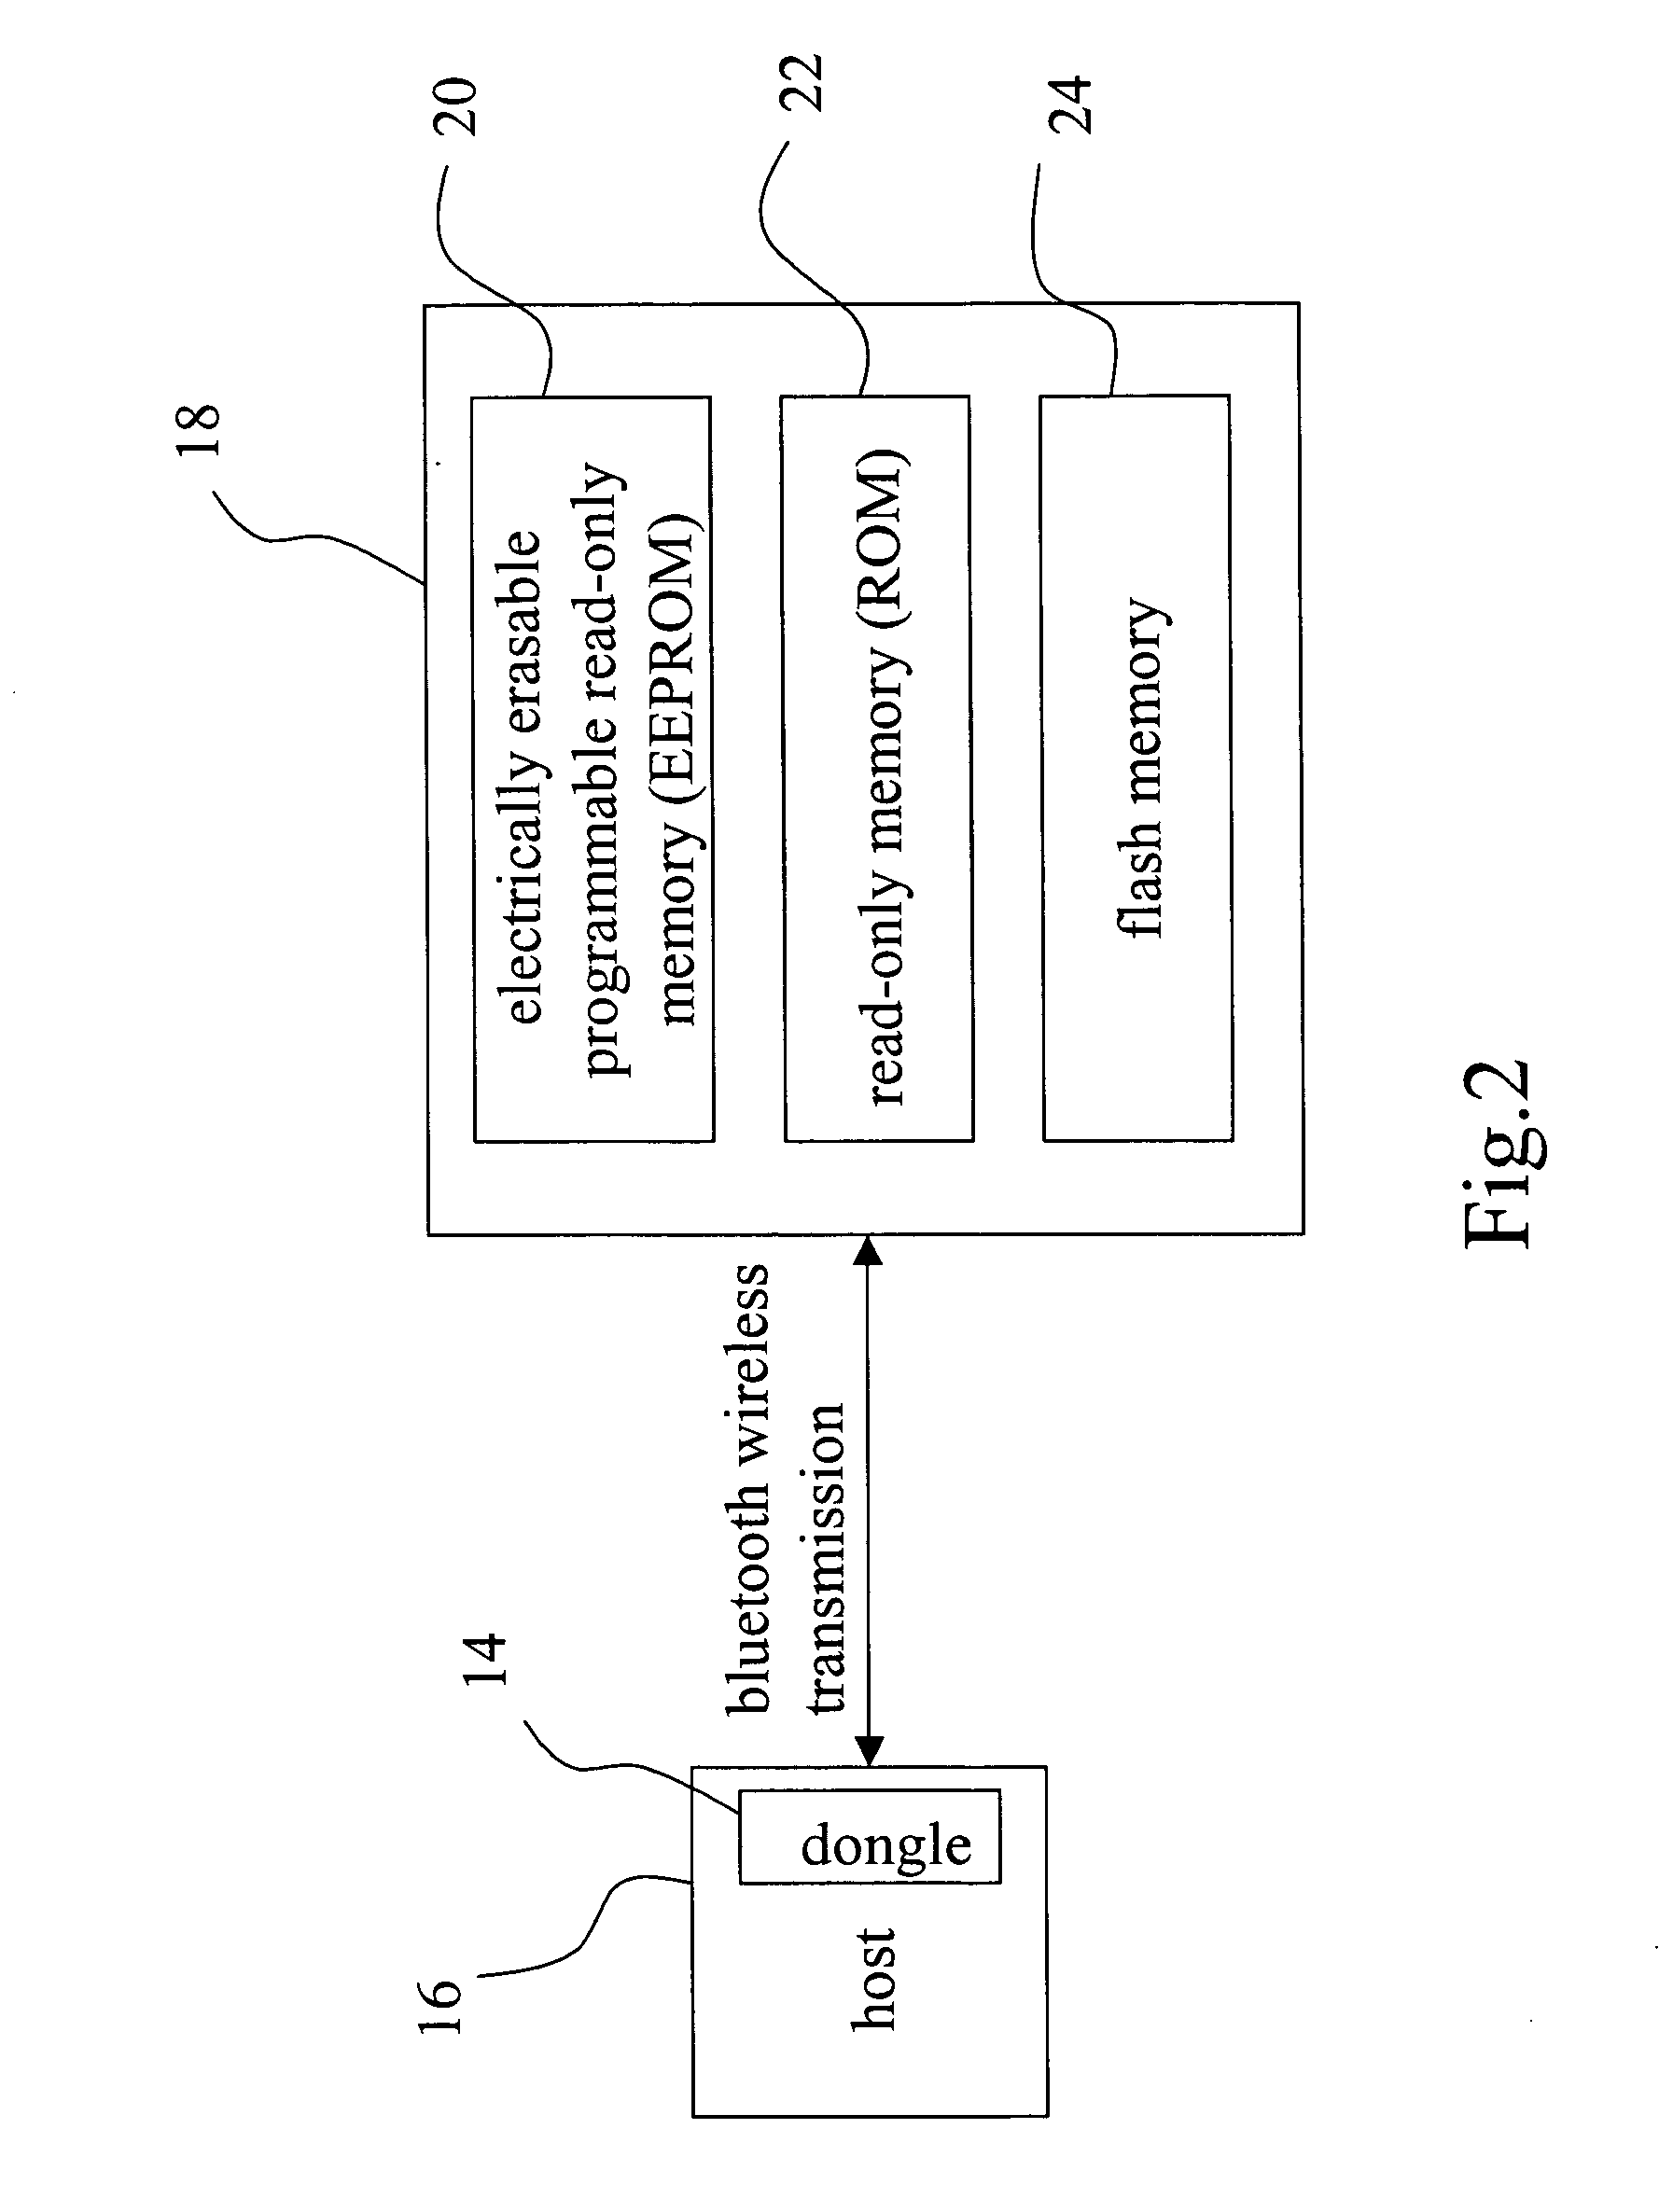 Method of updating firmware using object push profile in the bluetooth object exchange protocol